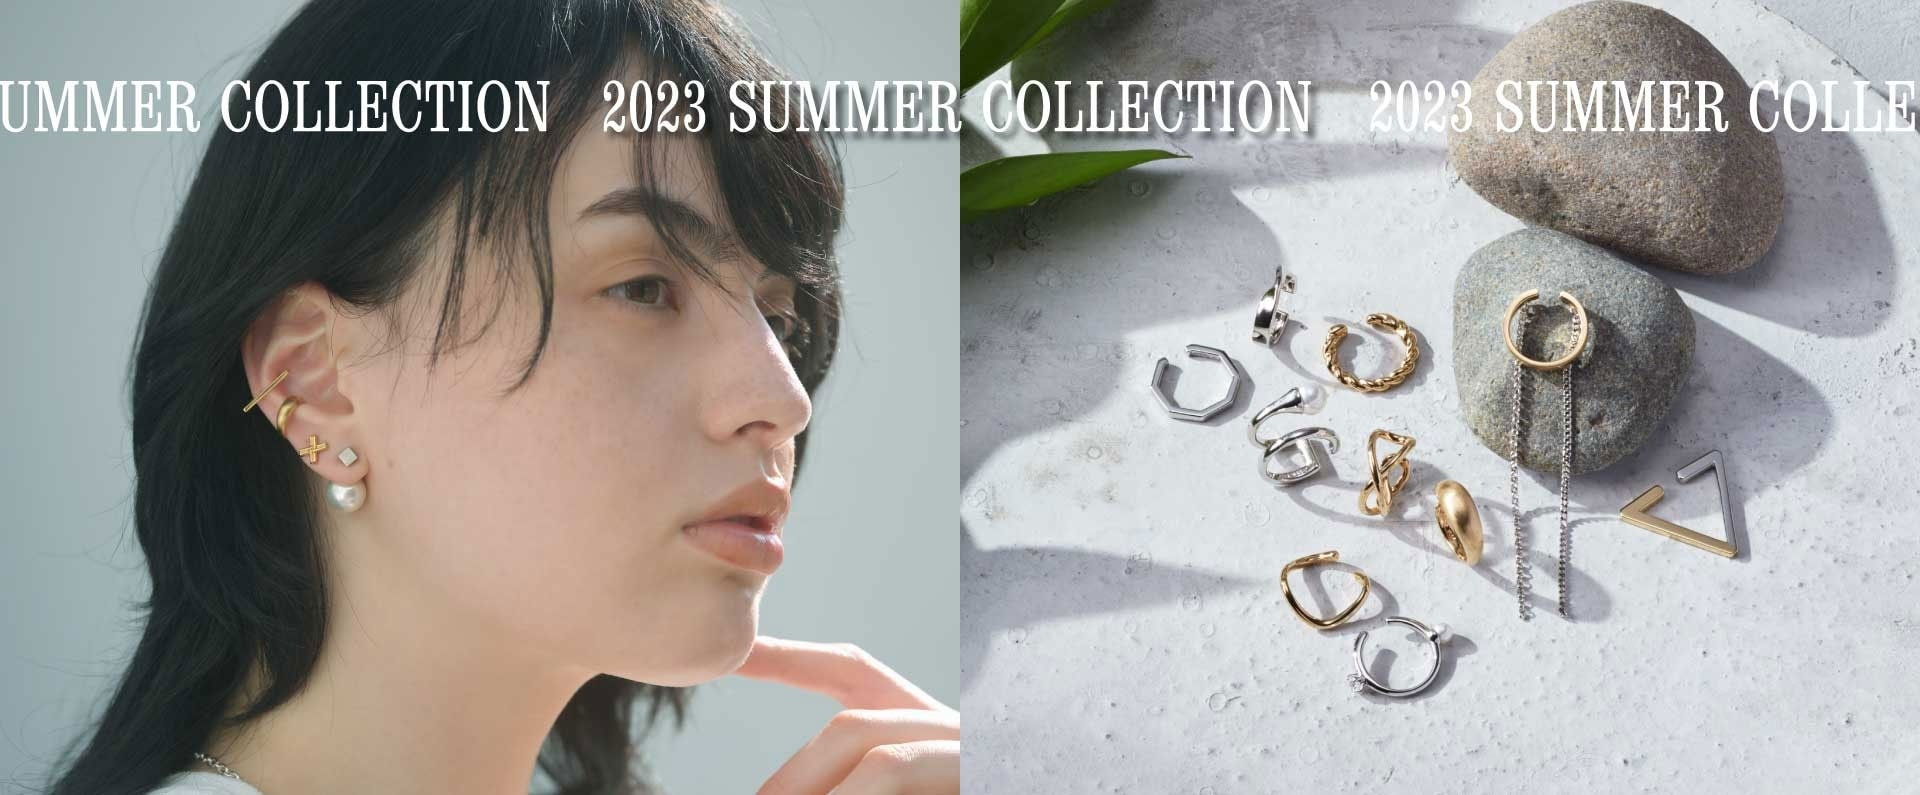 2023 SUMMER COLLECTION　jouete